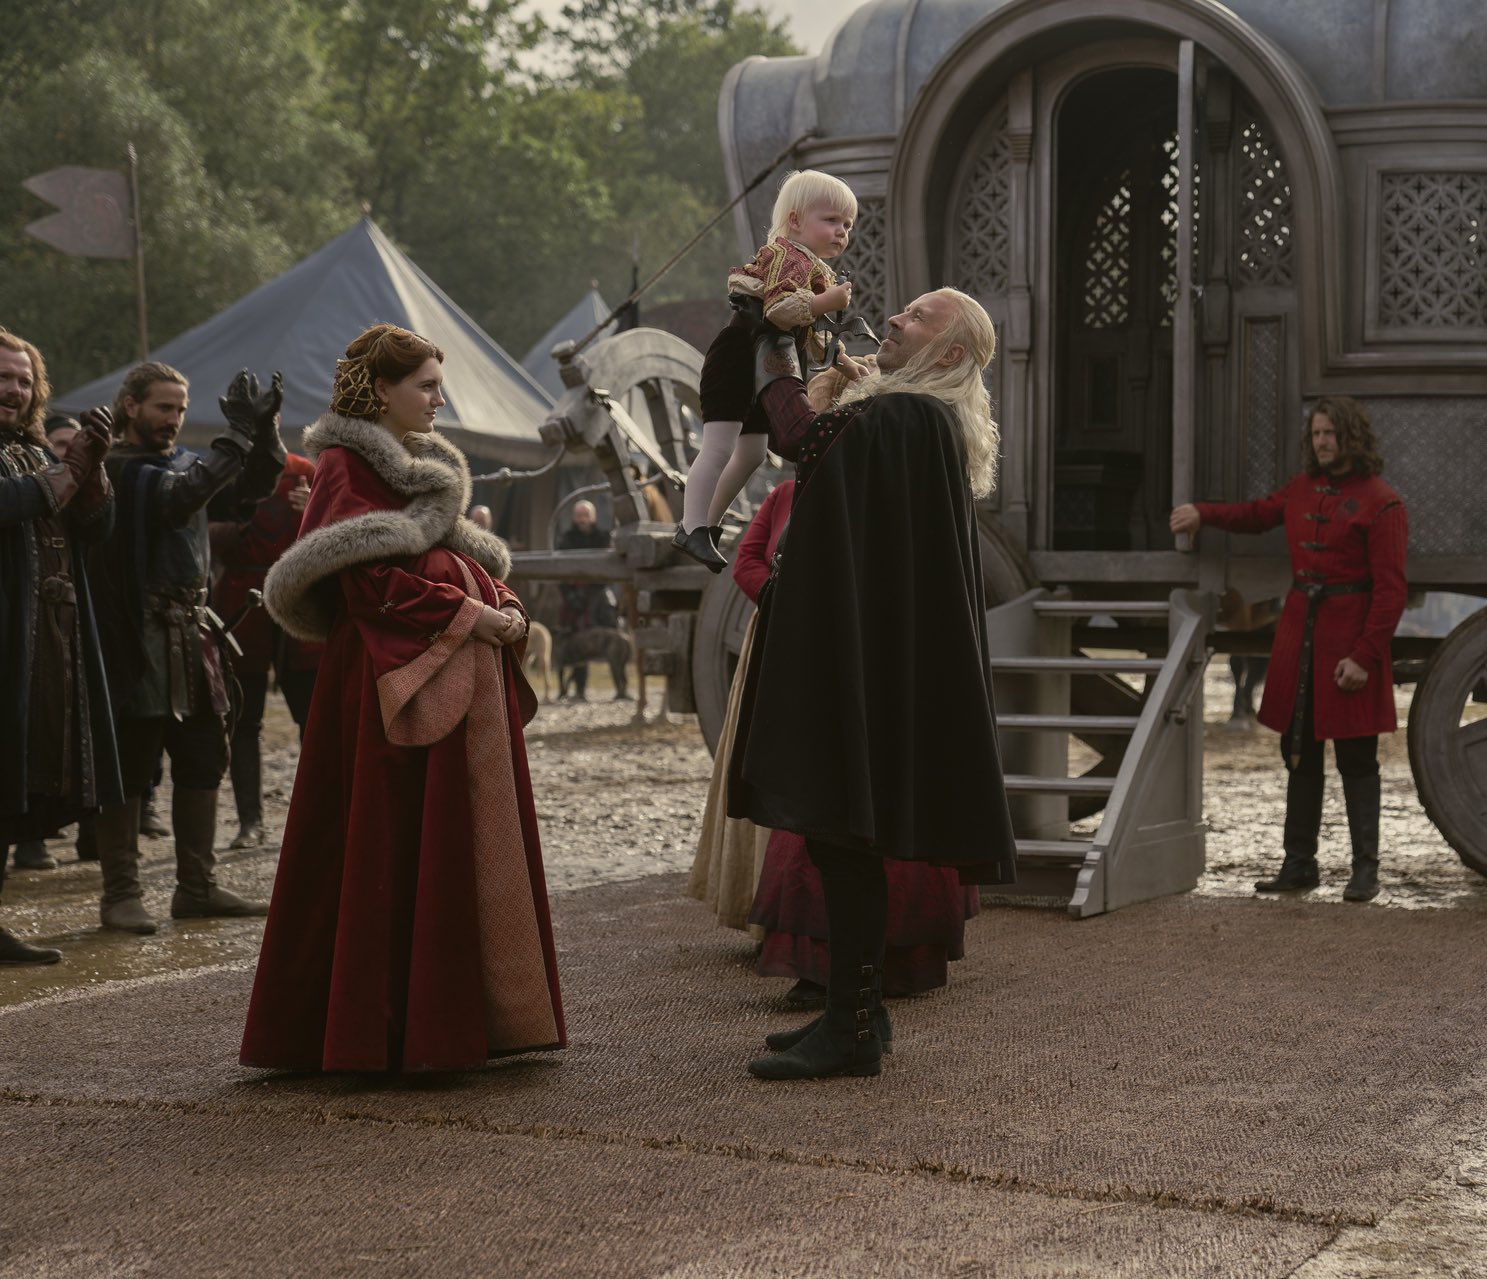 westerosies on Twitter: "King Viserys with Queen Alicent and Prince Aegon II in Episode 3 #HouseOfTheDragon #hotd https://t.co/G1qg0CaIKK" / Twitter